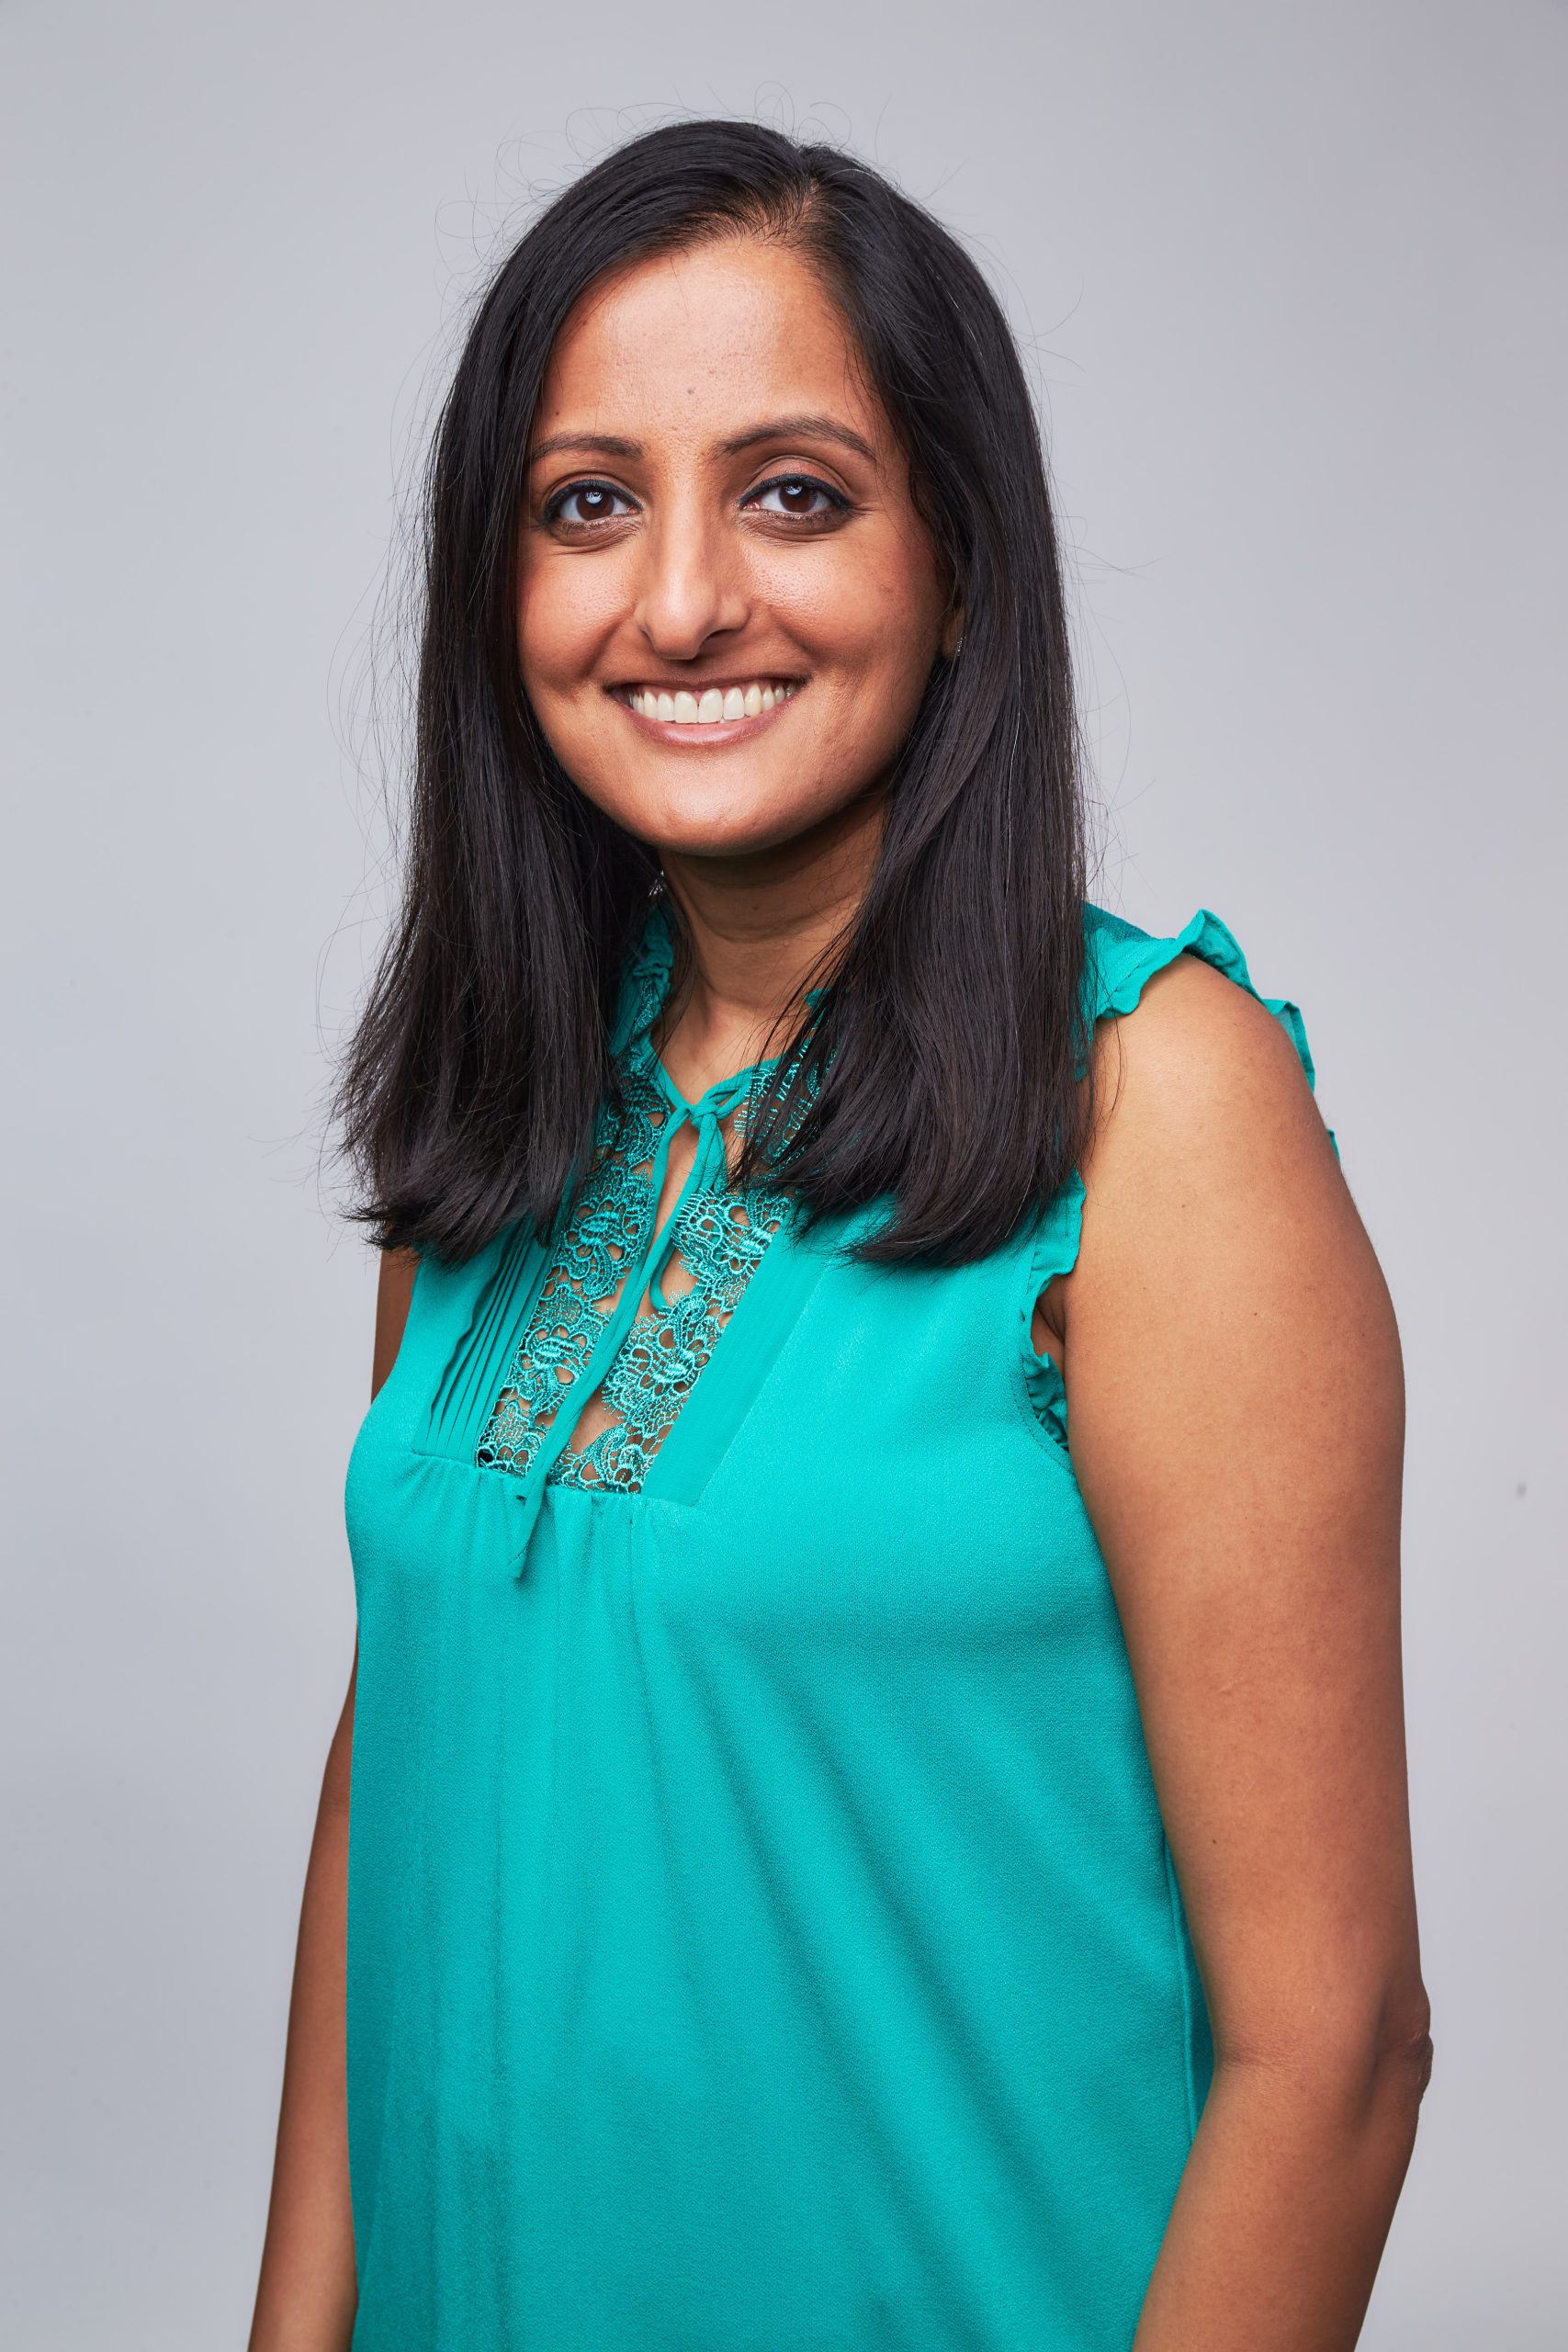 An Indian woman in a teal shirt is smiling.